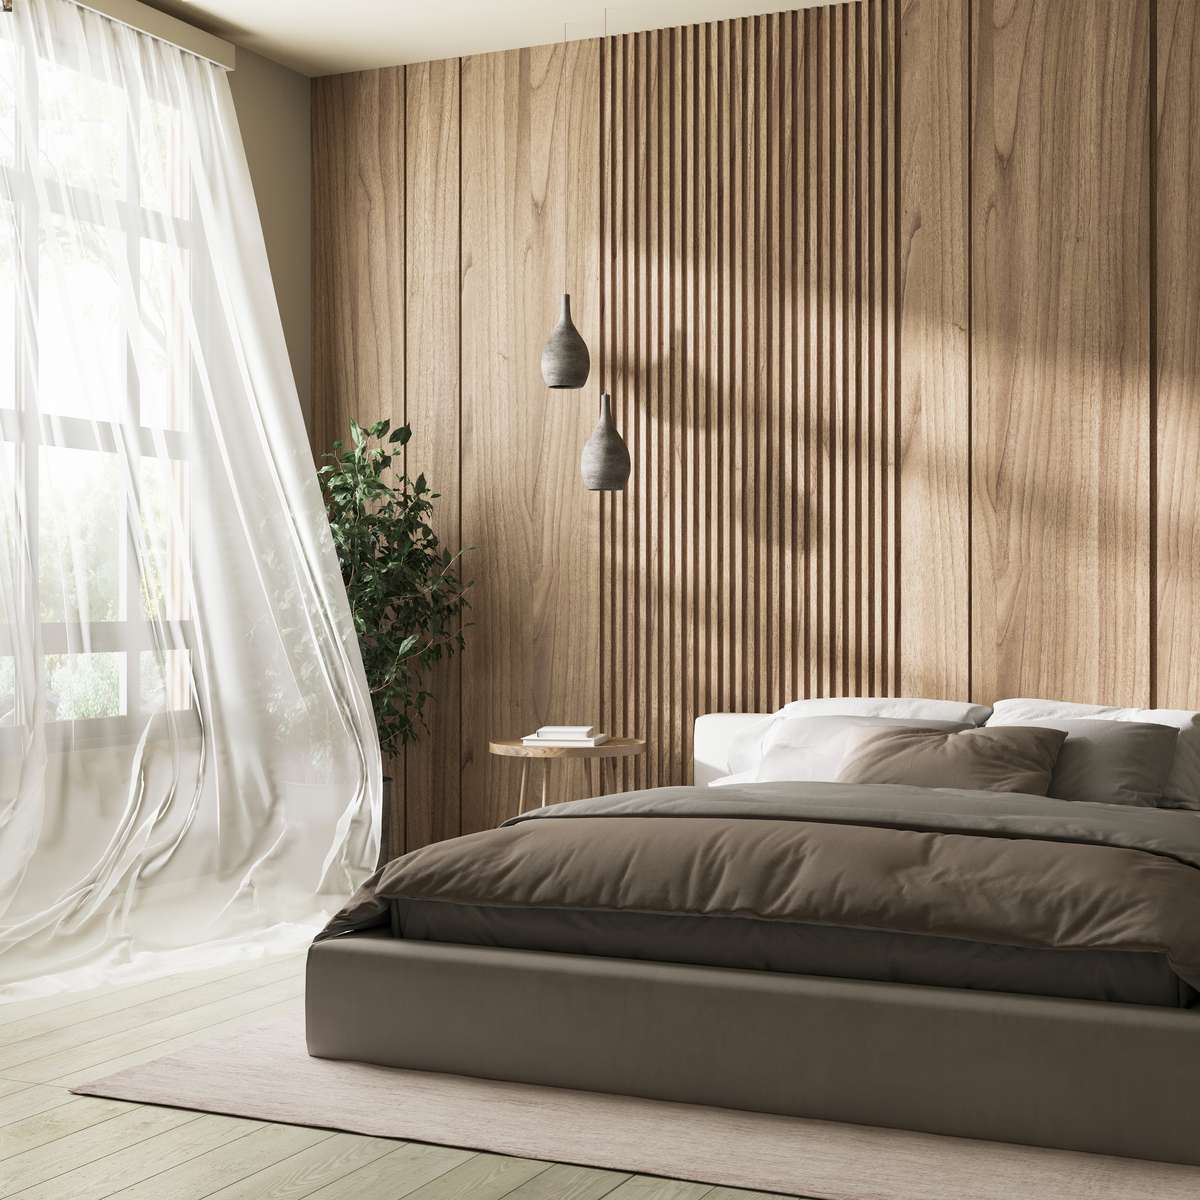 Foto: bedroom interior with wooden panel wall bed near 2022 06 02 23 20 48 utc  1 